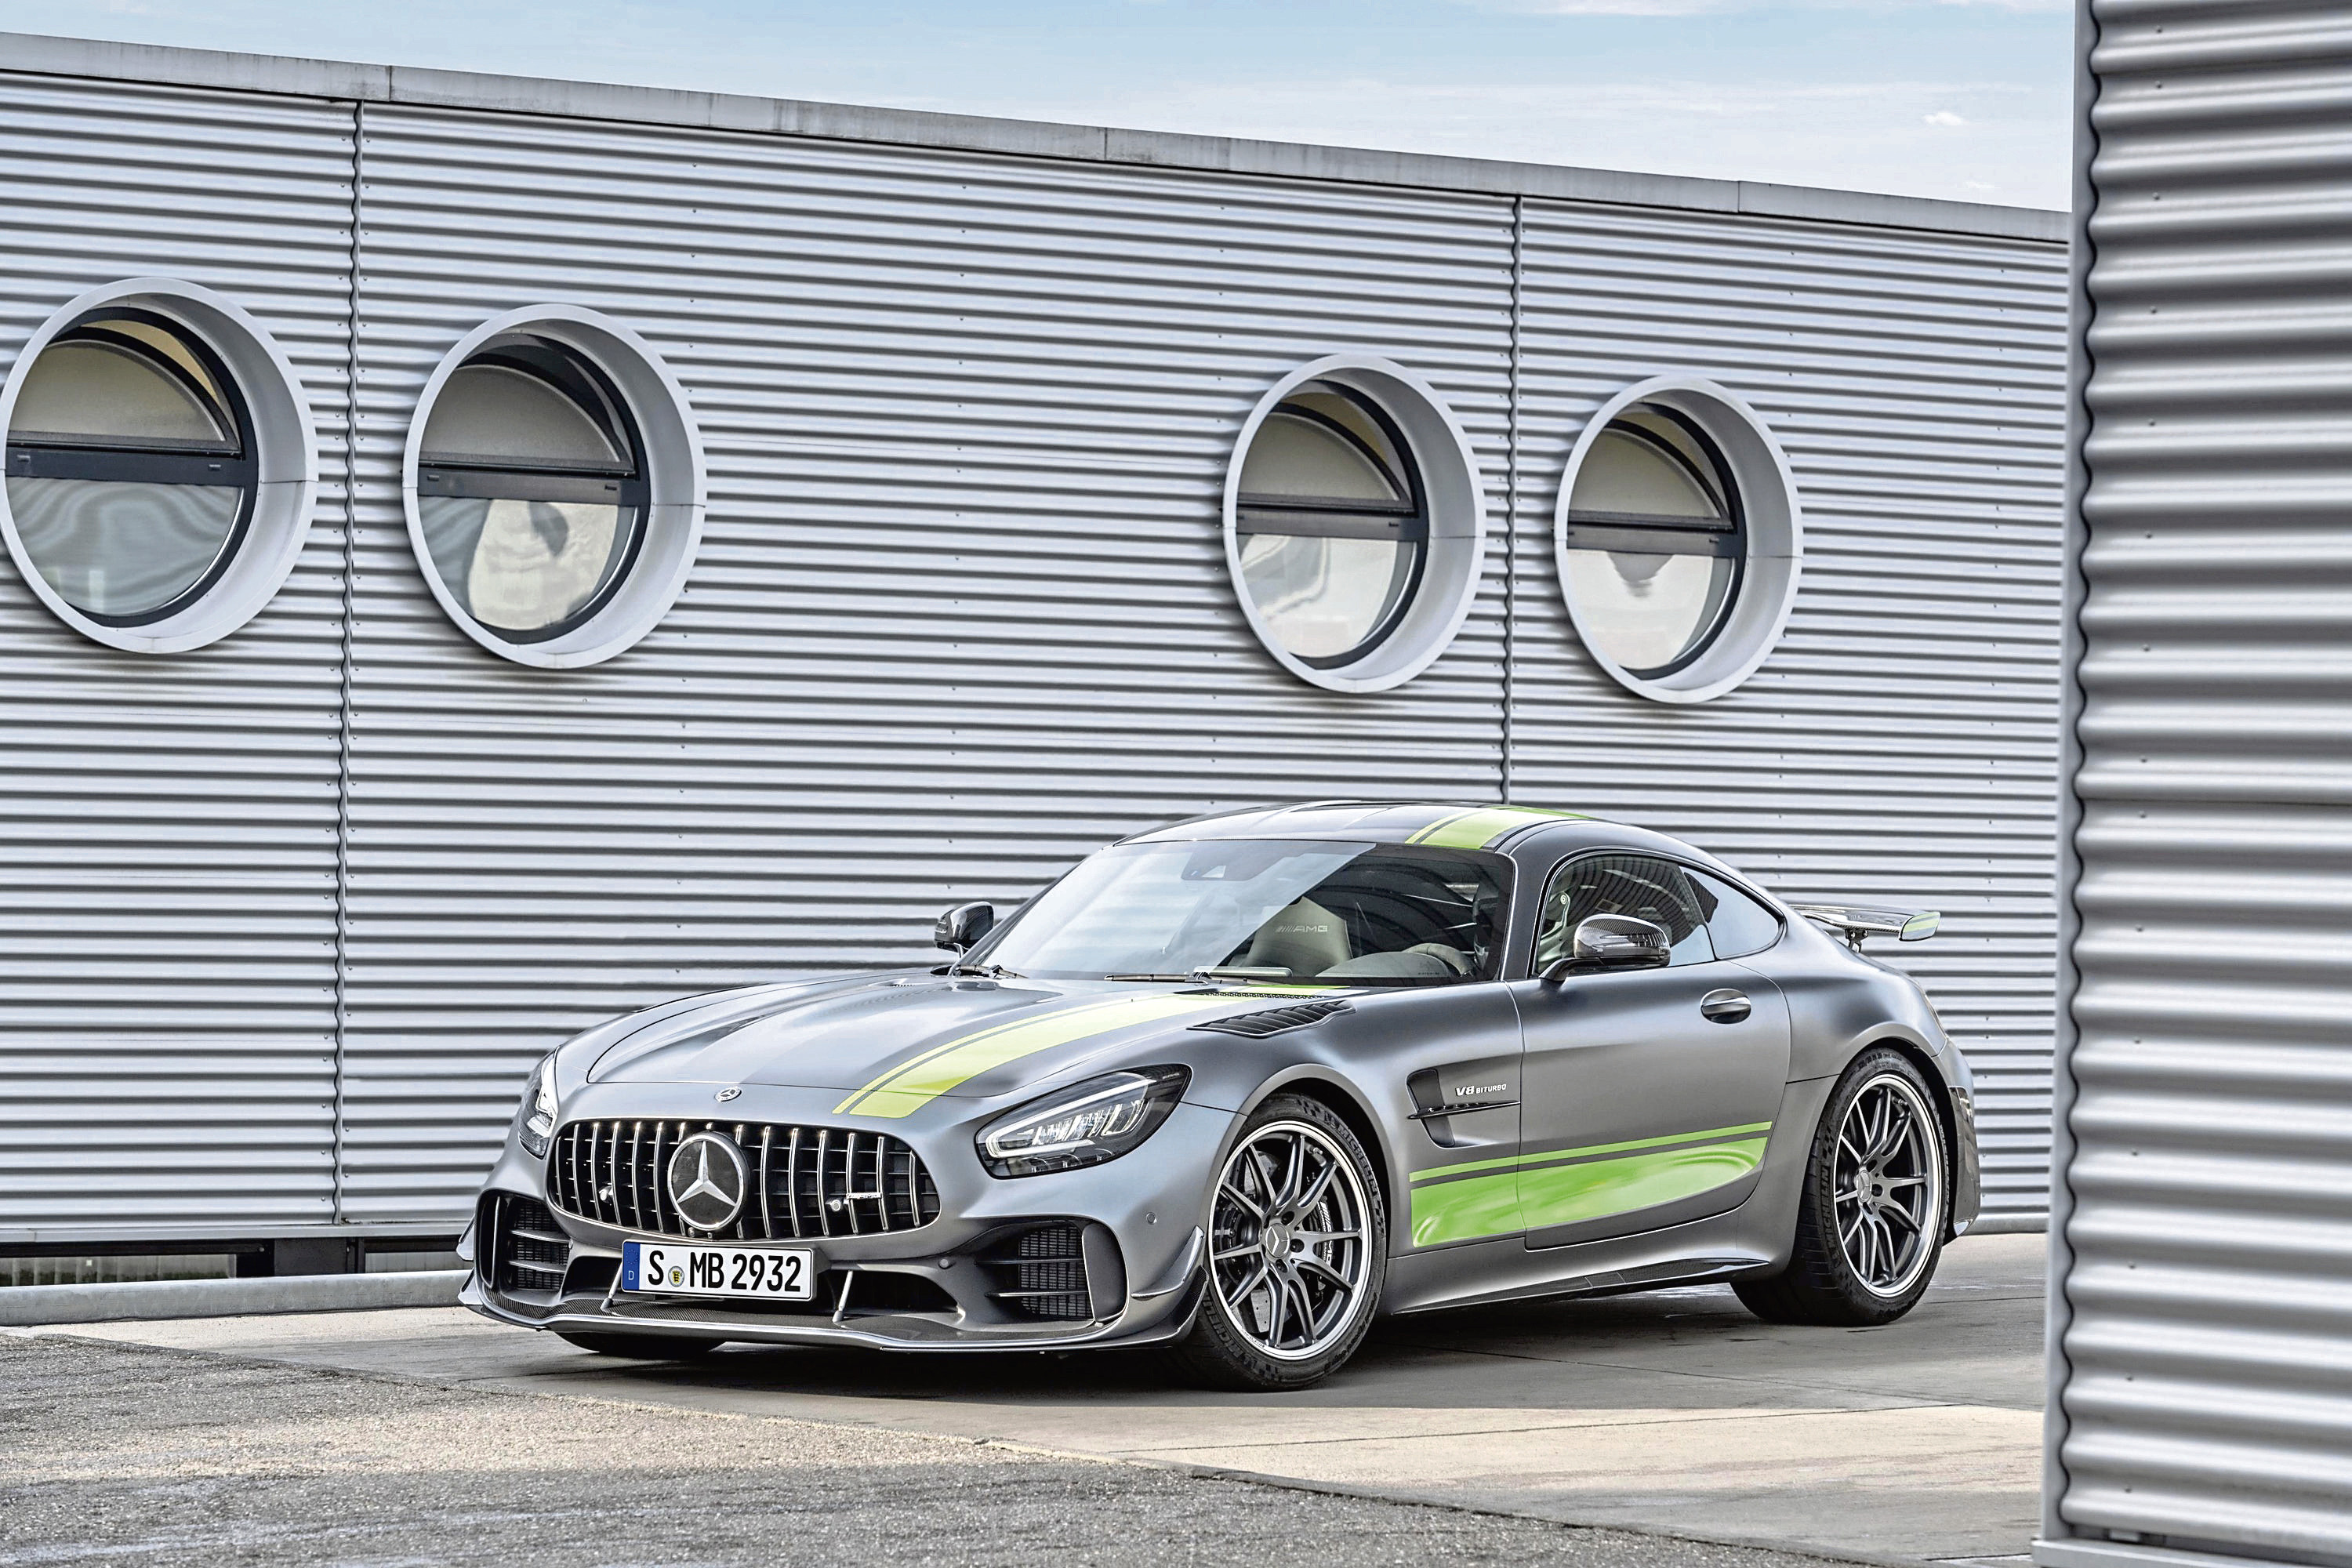 Mercedes-AMG looks to shift to all-wheel drive